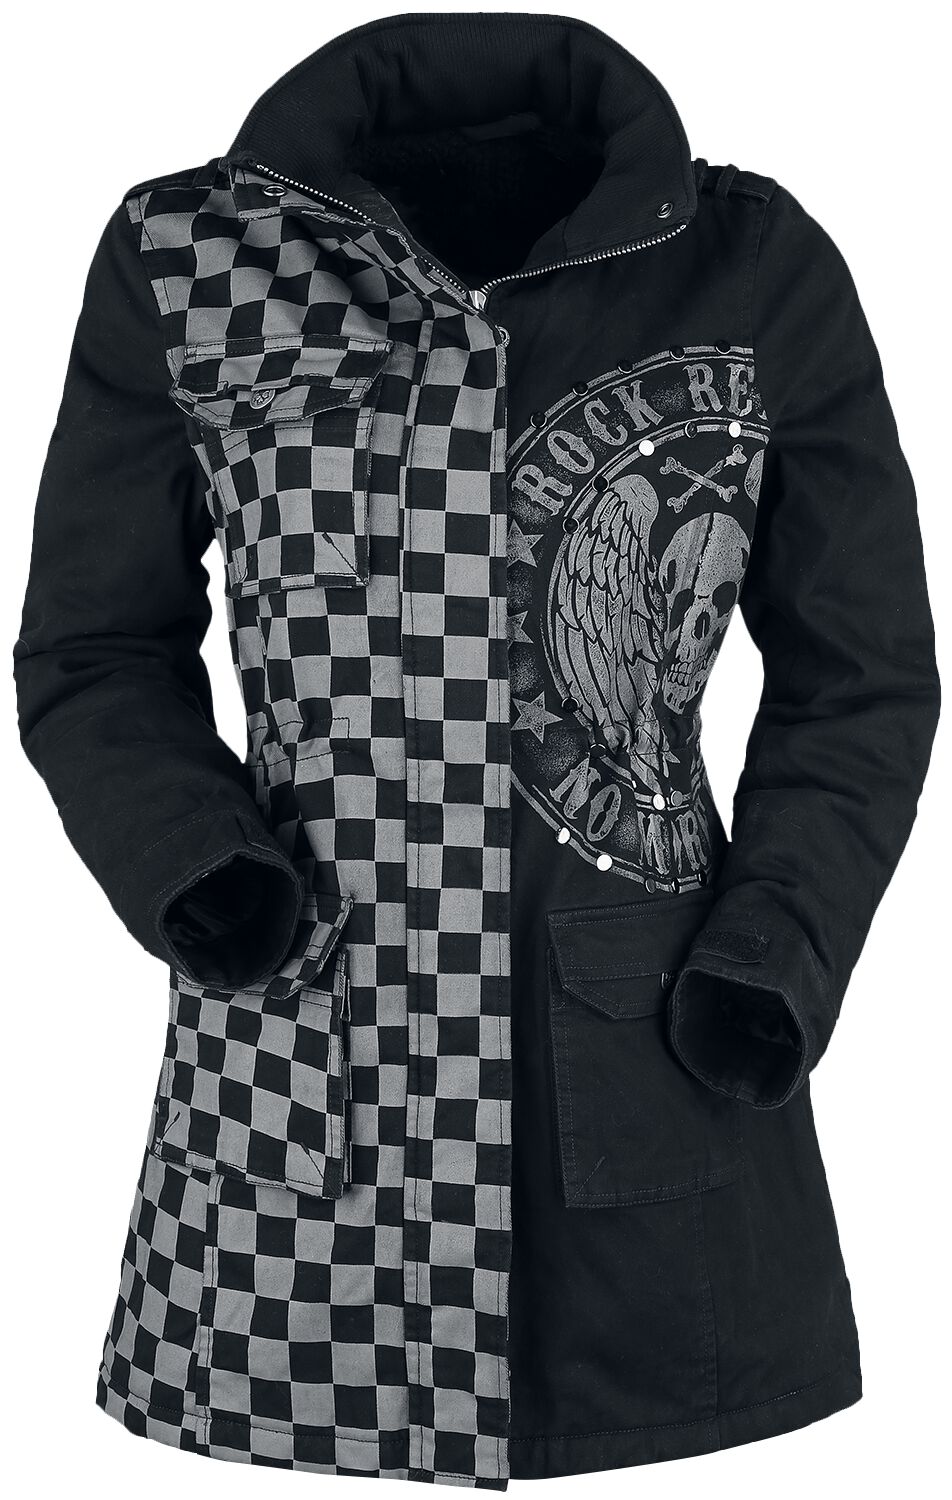 Image of Giacca invernale di Rock Rebel by EMP - Black/Grey Jacket with Studs and Print - S a XXL - Donna - grigio/nero